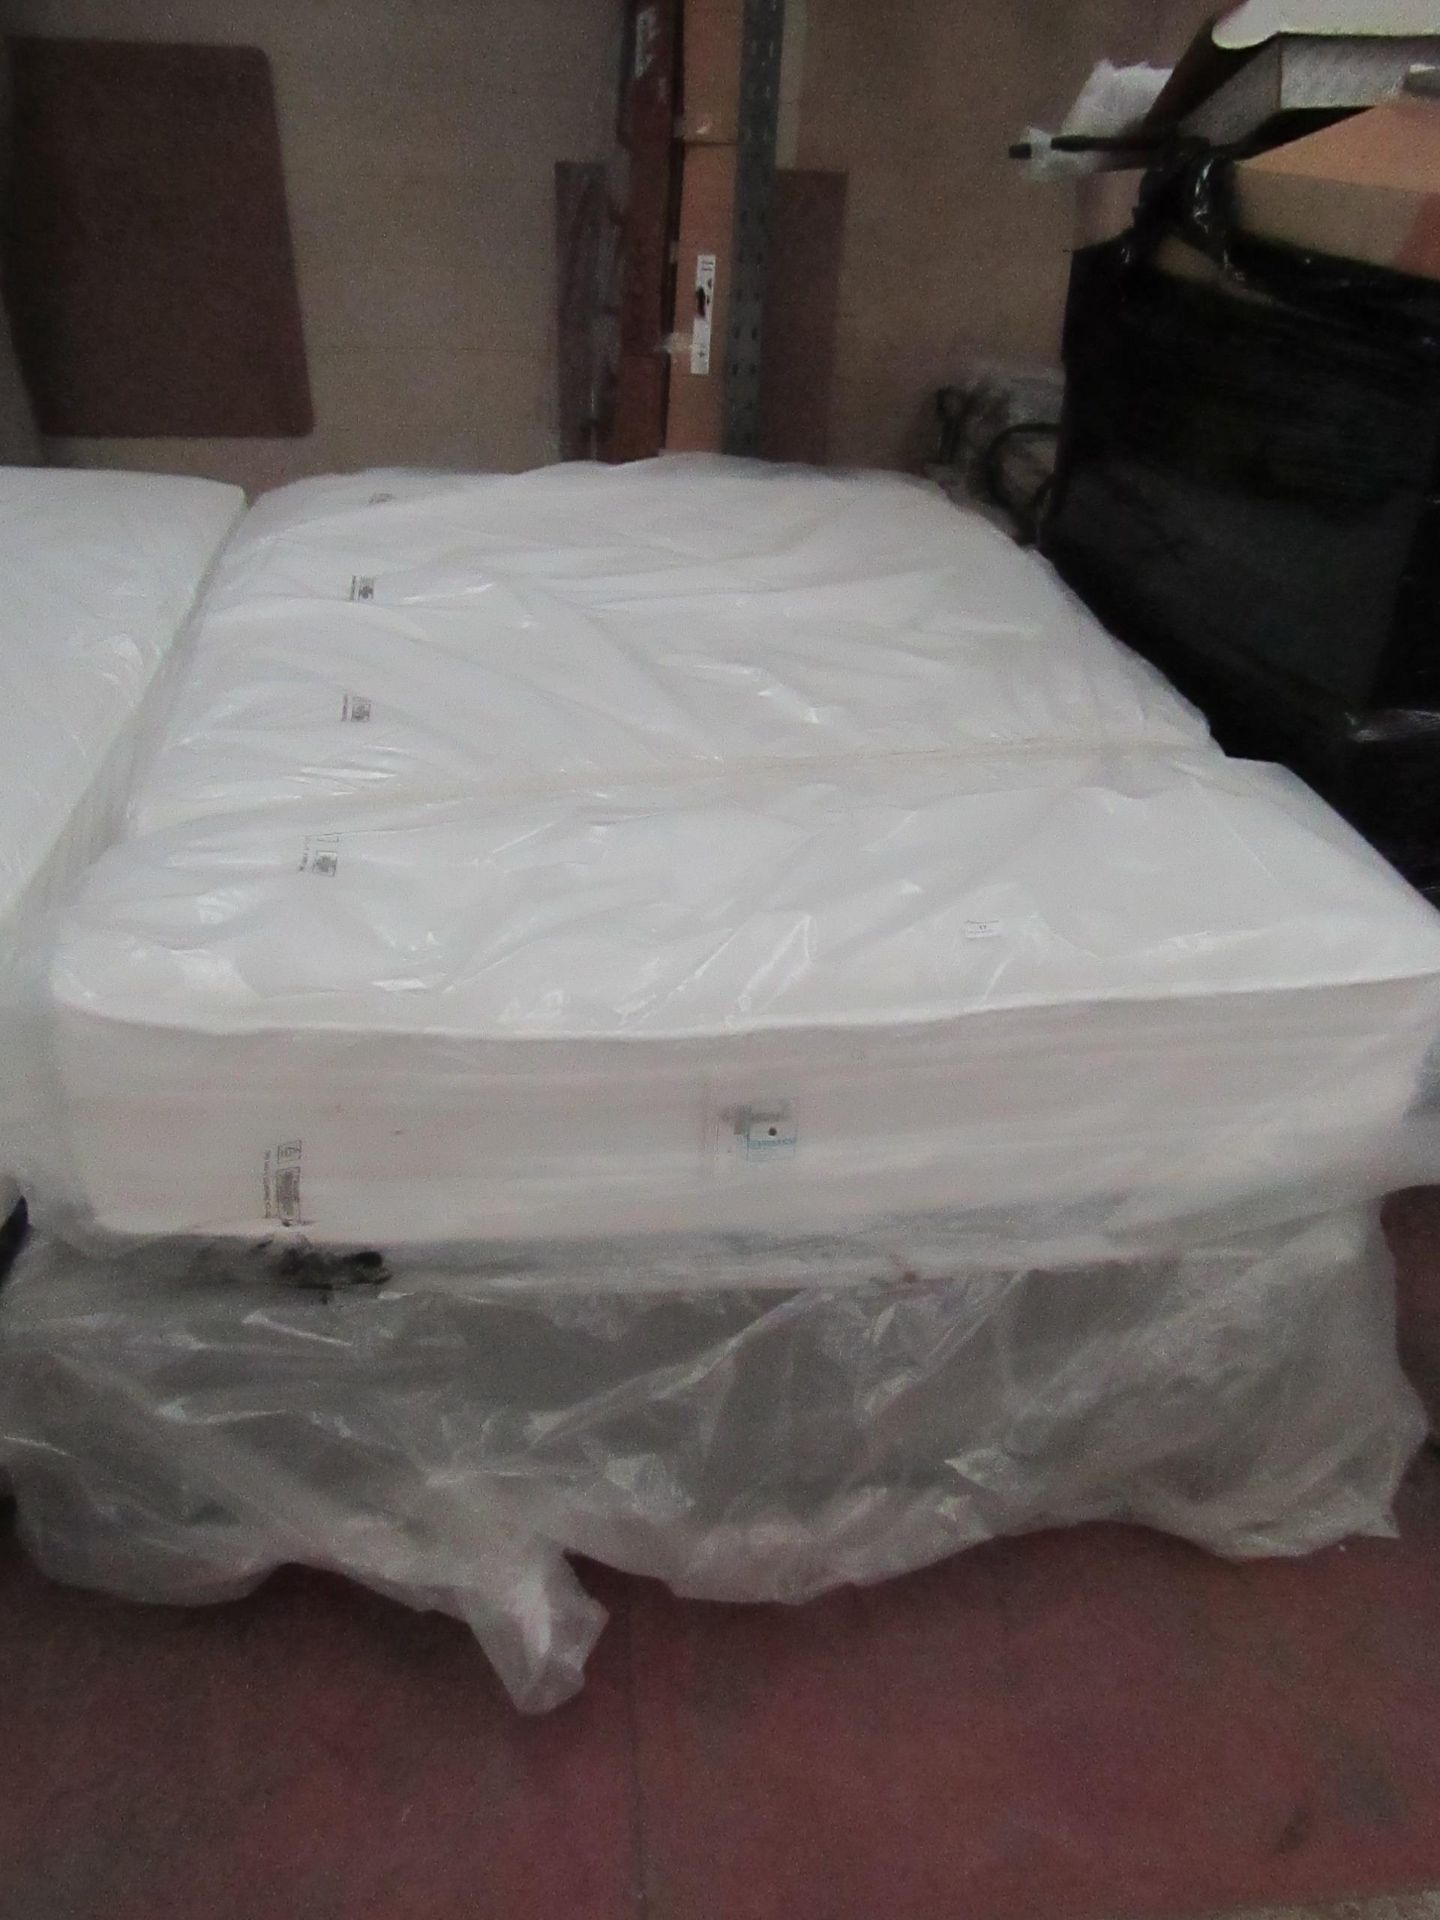 Kingsize mattress with divan base, ex-display so item may contain a few marks etc.